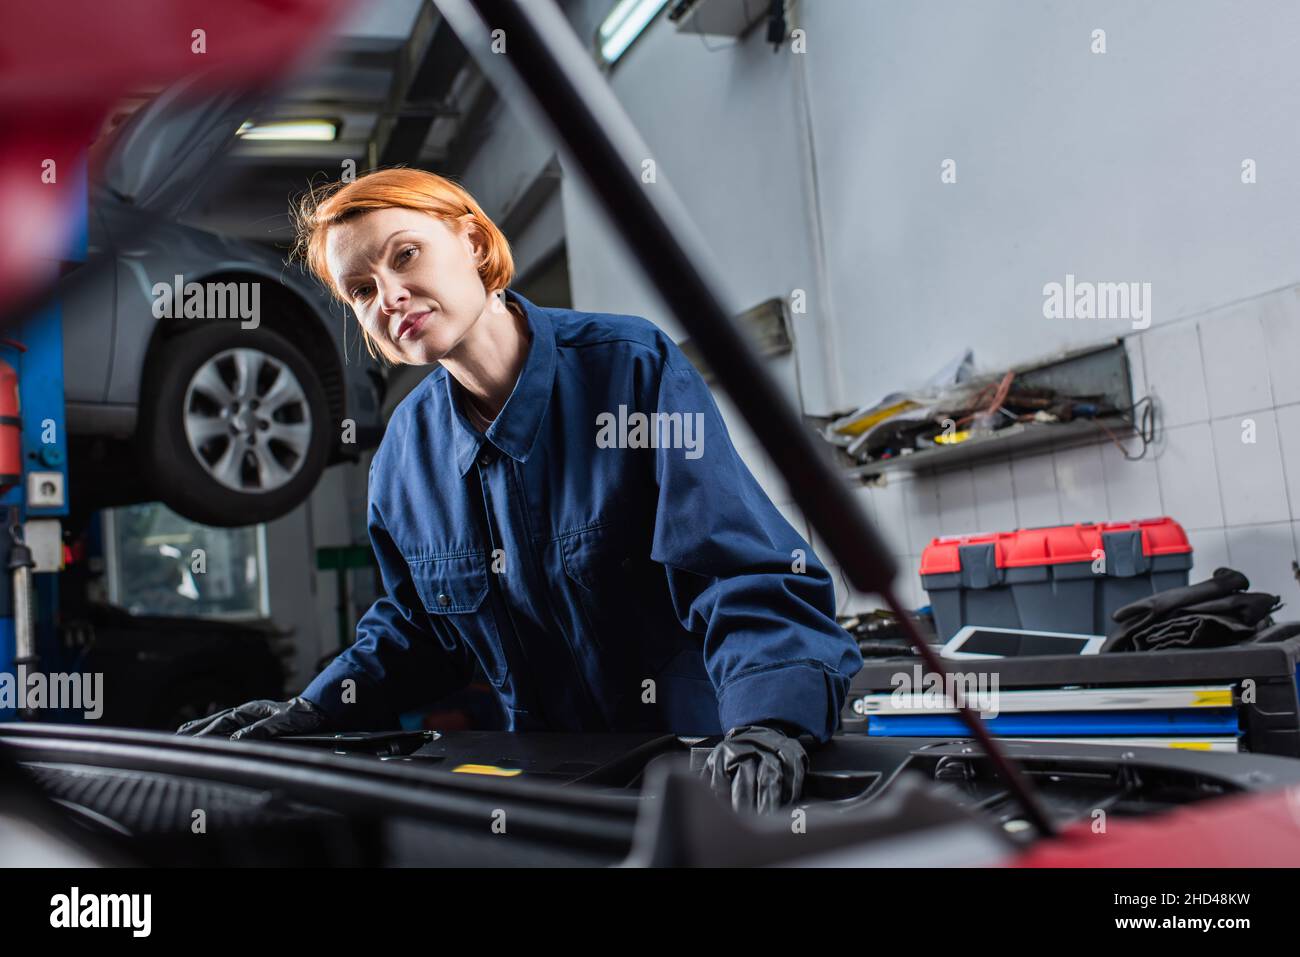 forewoman in uniform looking at camera near blurred car in workshop Stock Photo